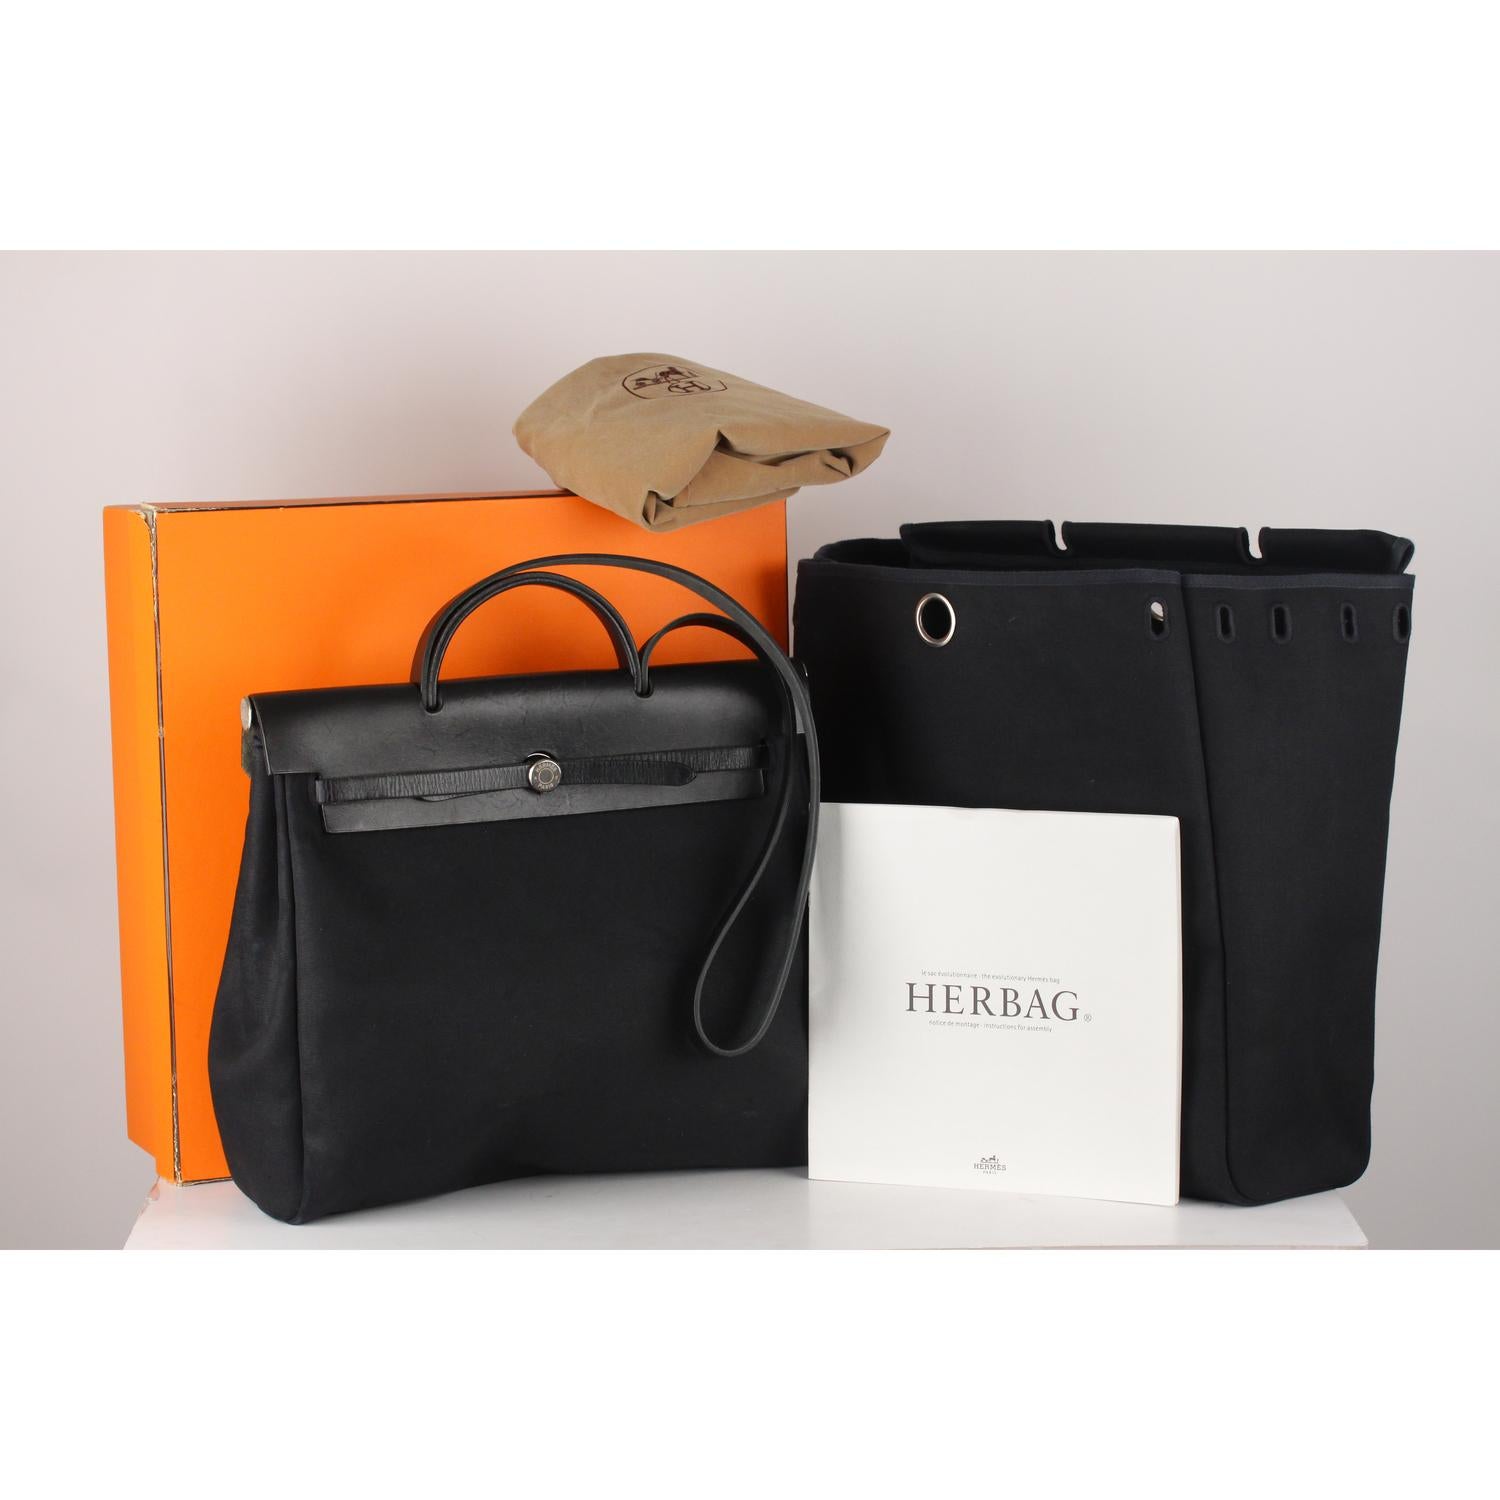 Beautiful Hermes 'Herbag' crafted in black color. Comes with two interchangeable canvas bottoms;  The body is made from canvas but the top is crafted from leather. It comes with long straps for shoulder or across body carry. The bag is locked by